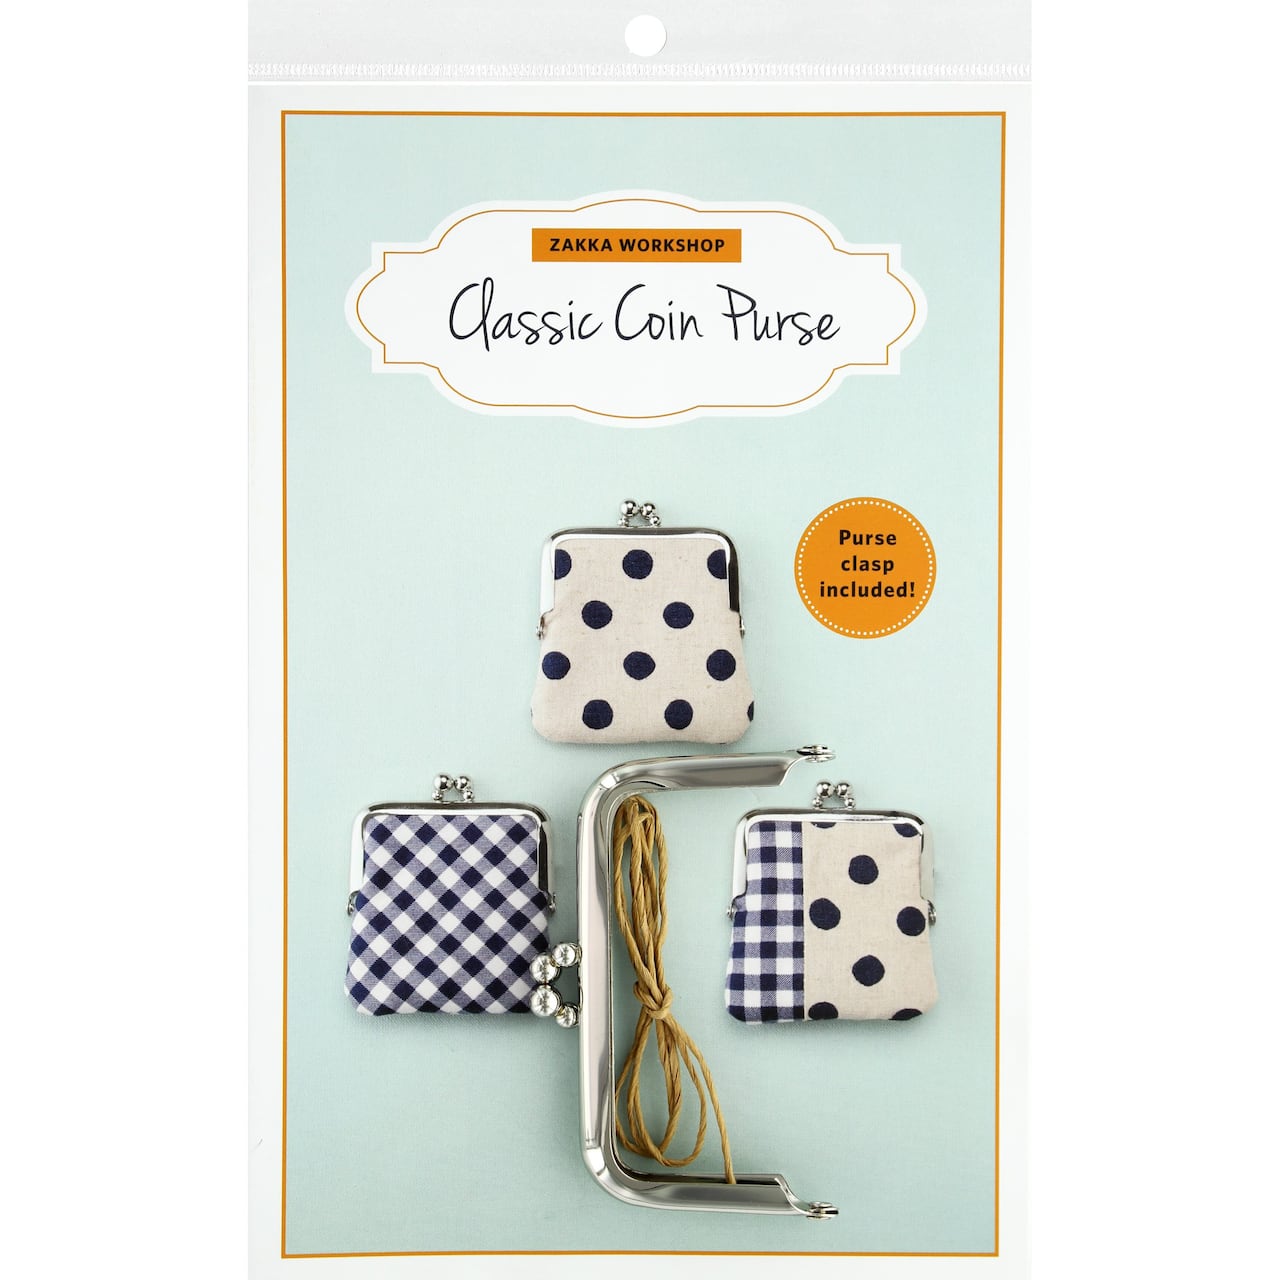 Zakka Workshop Classic Coin Purse With Silver Clasp Kit